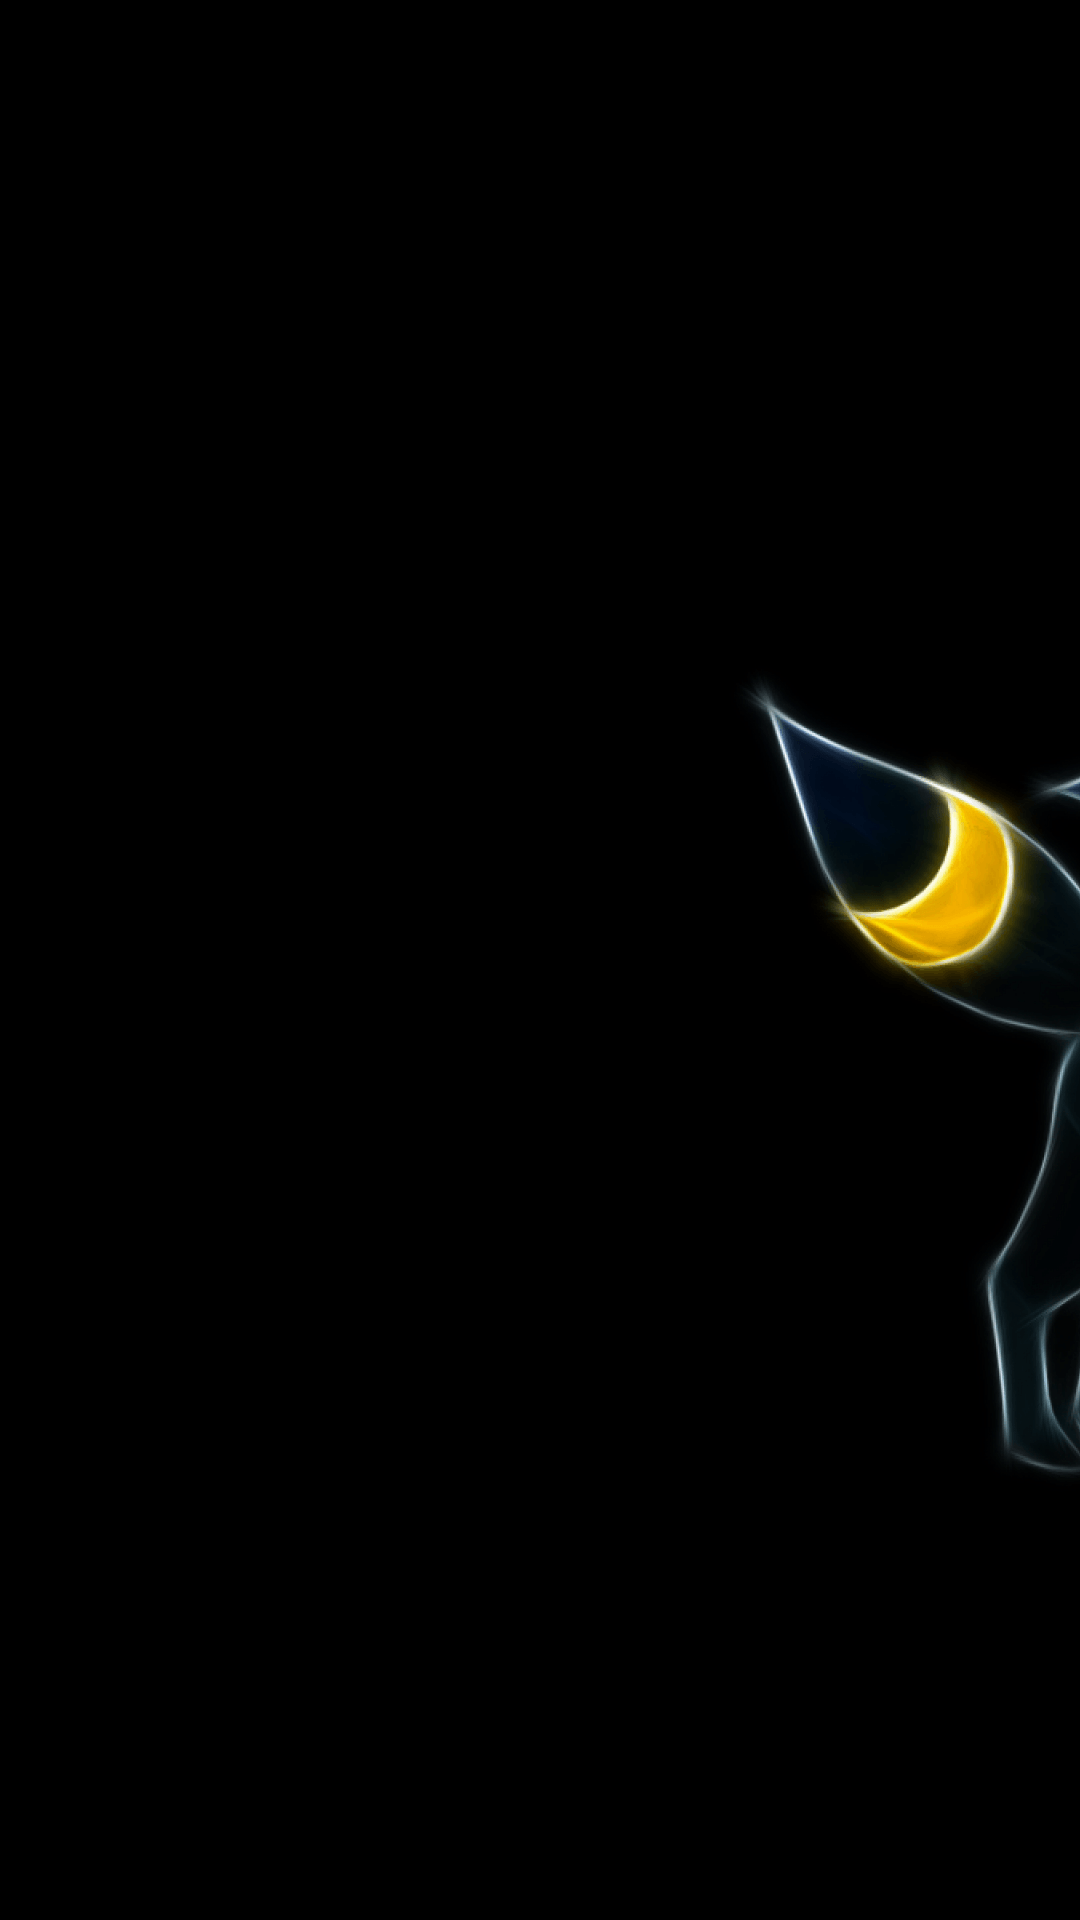 Download Umbreon Pokémon wallpapers for mobile phone free Umbreon  Pokémon HD pictures